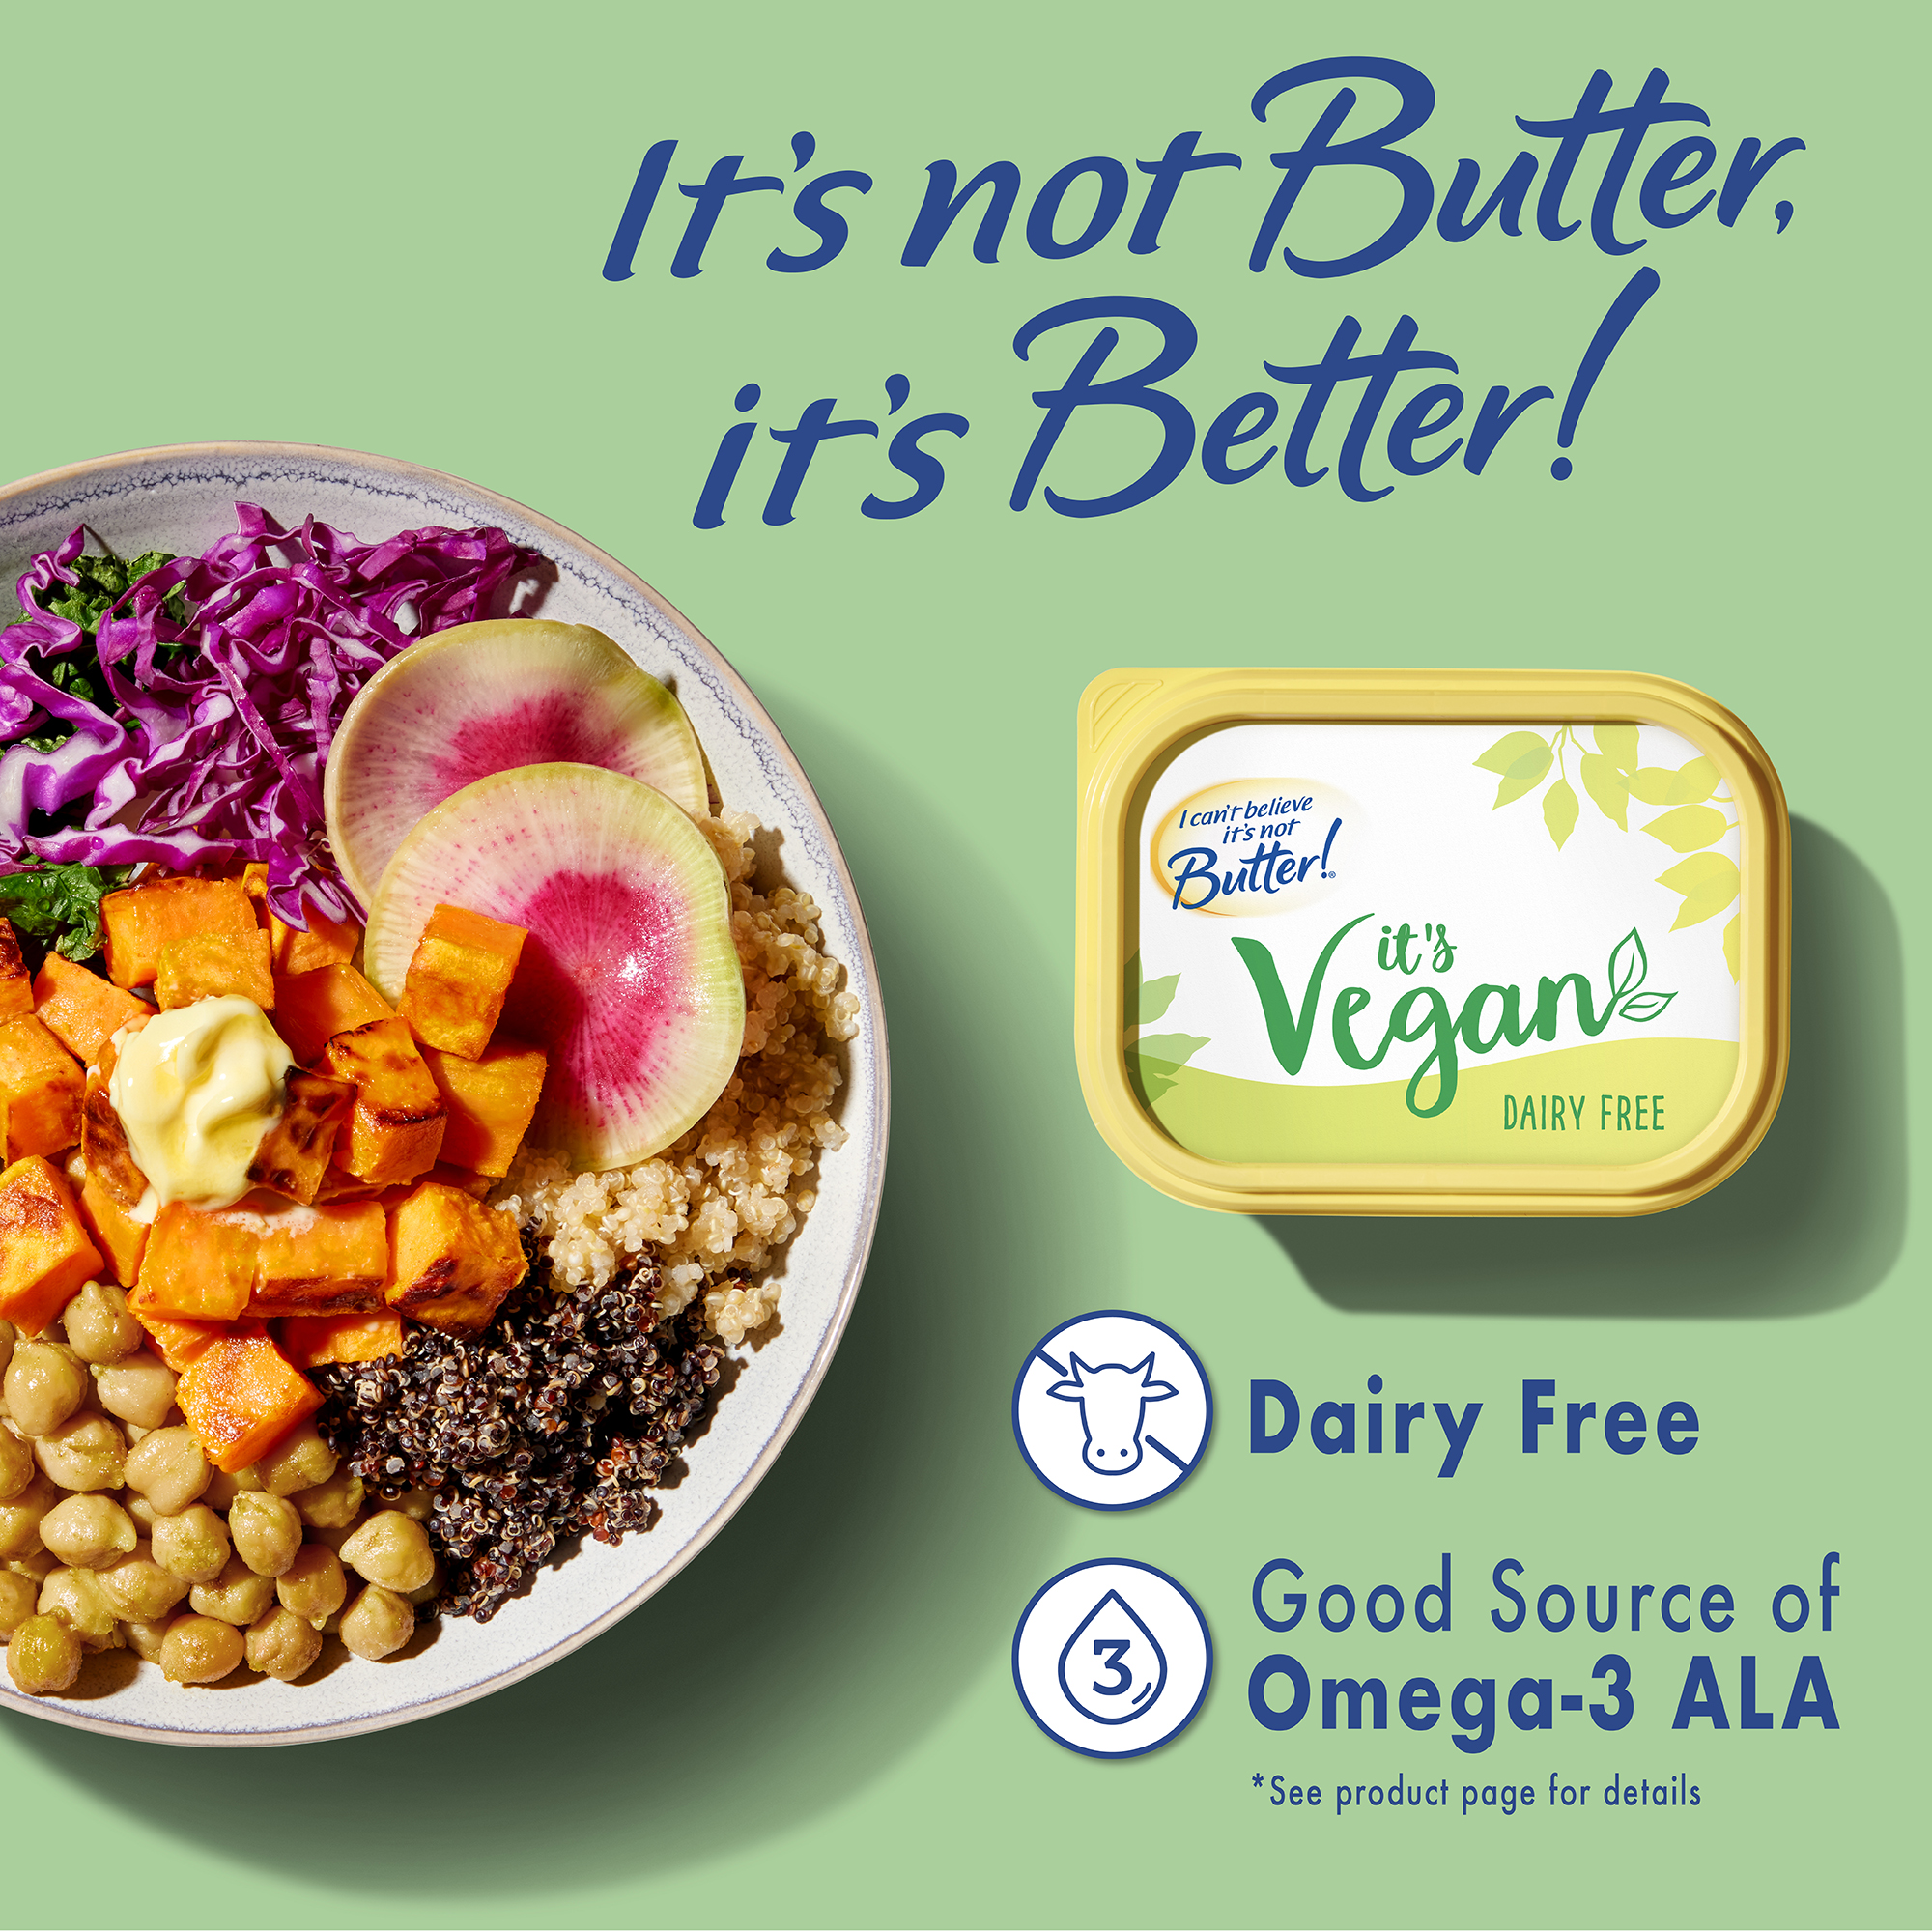 I Can’t Believe It’s Not Butter! Vegan Spread, 15 oz Tub (Refrigerated) - image 4 of 11